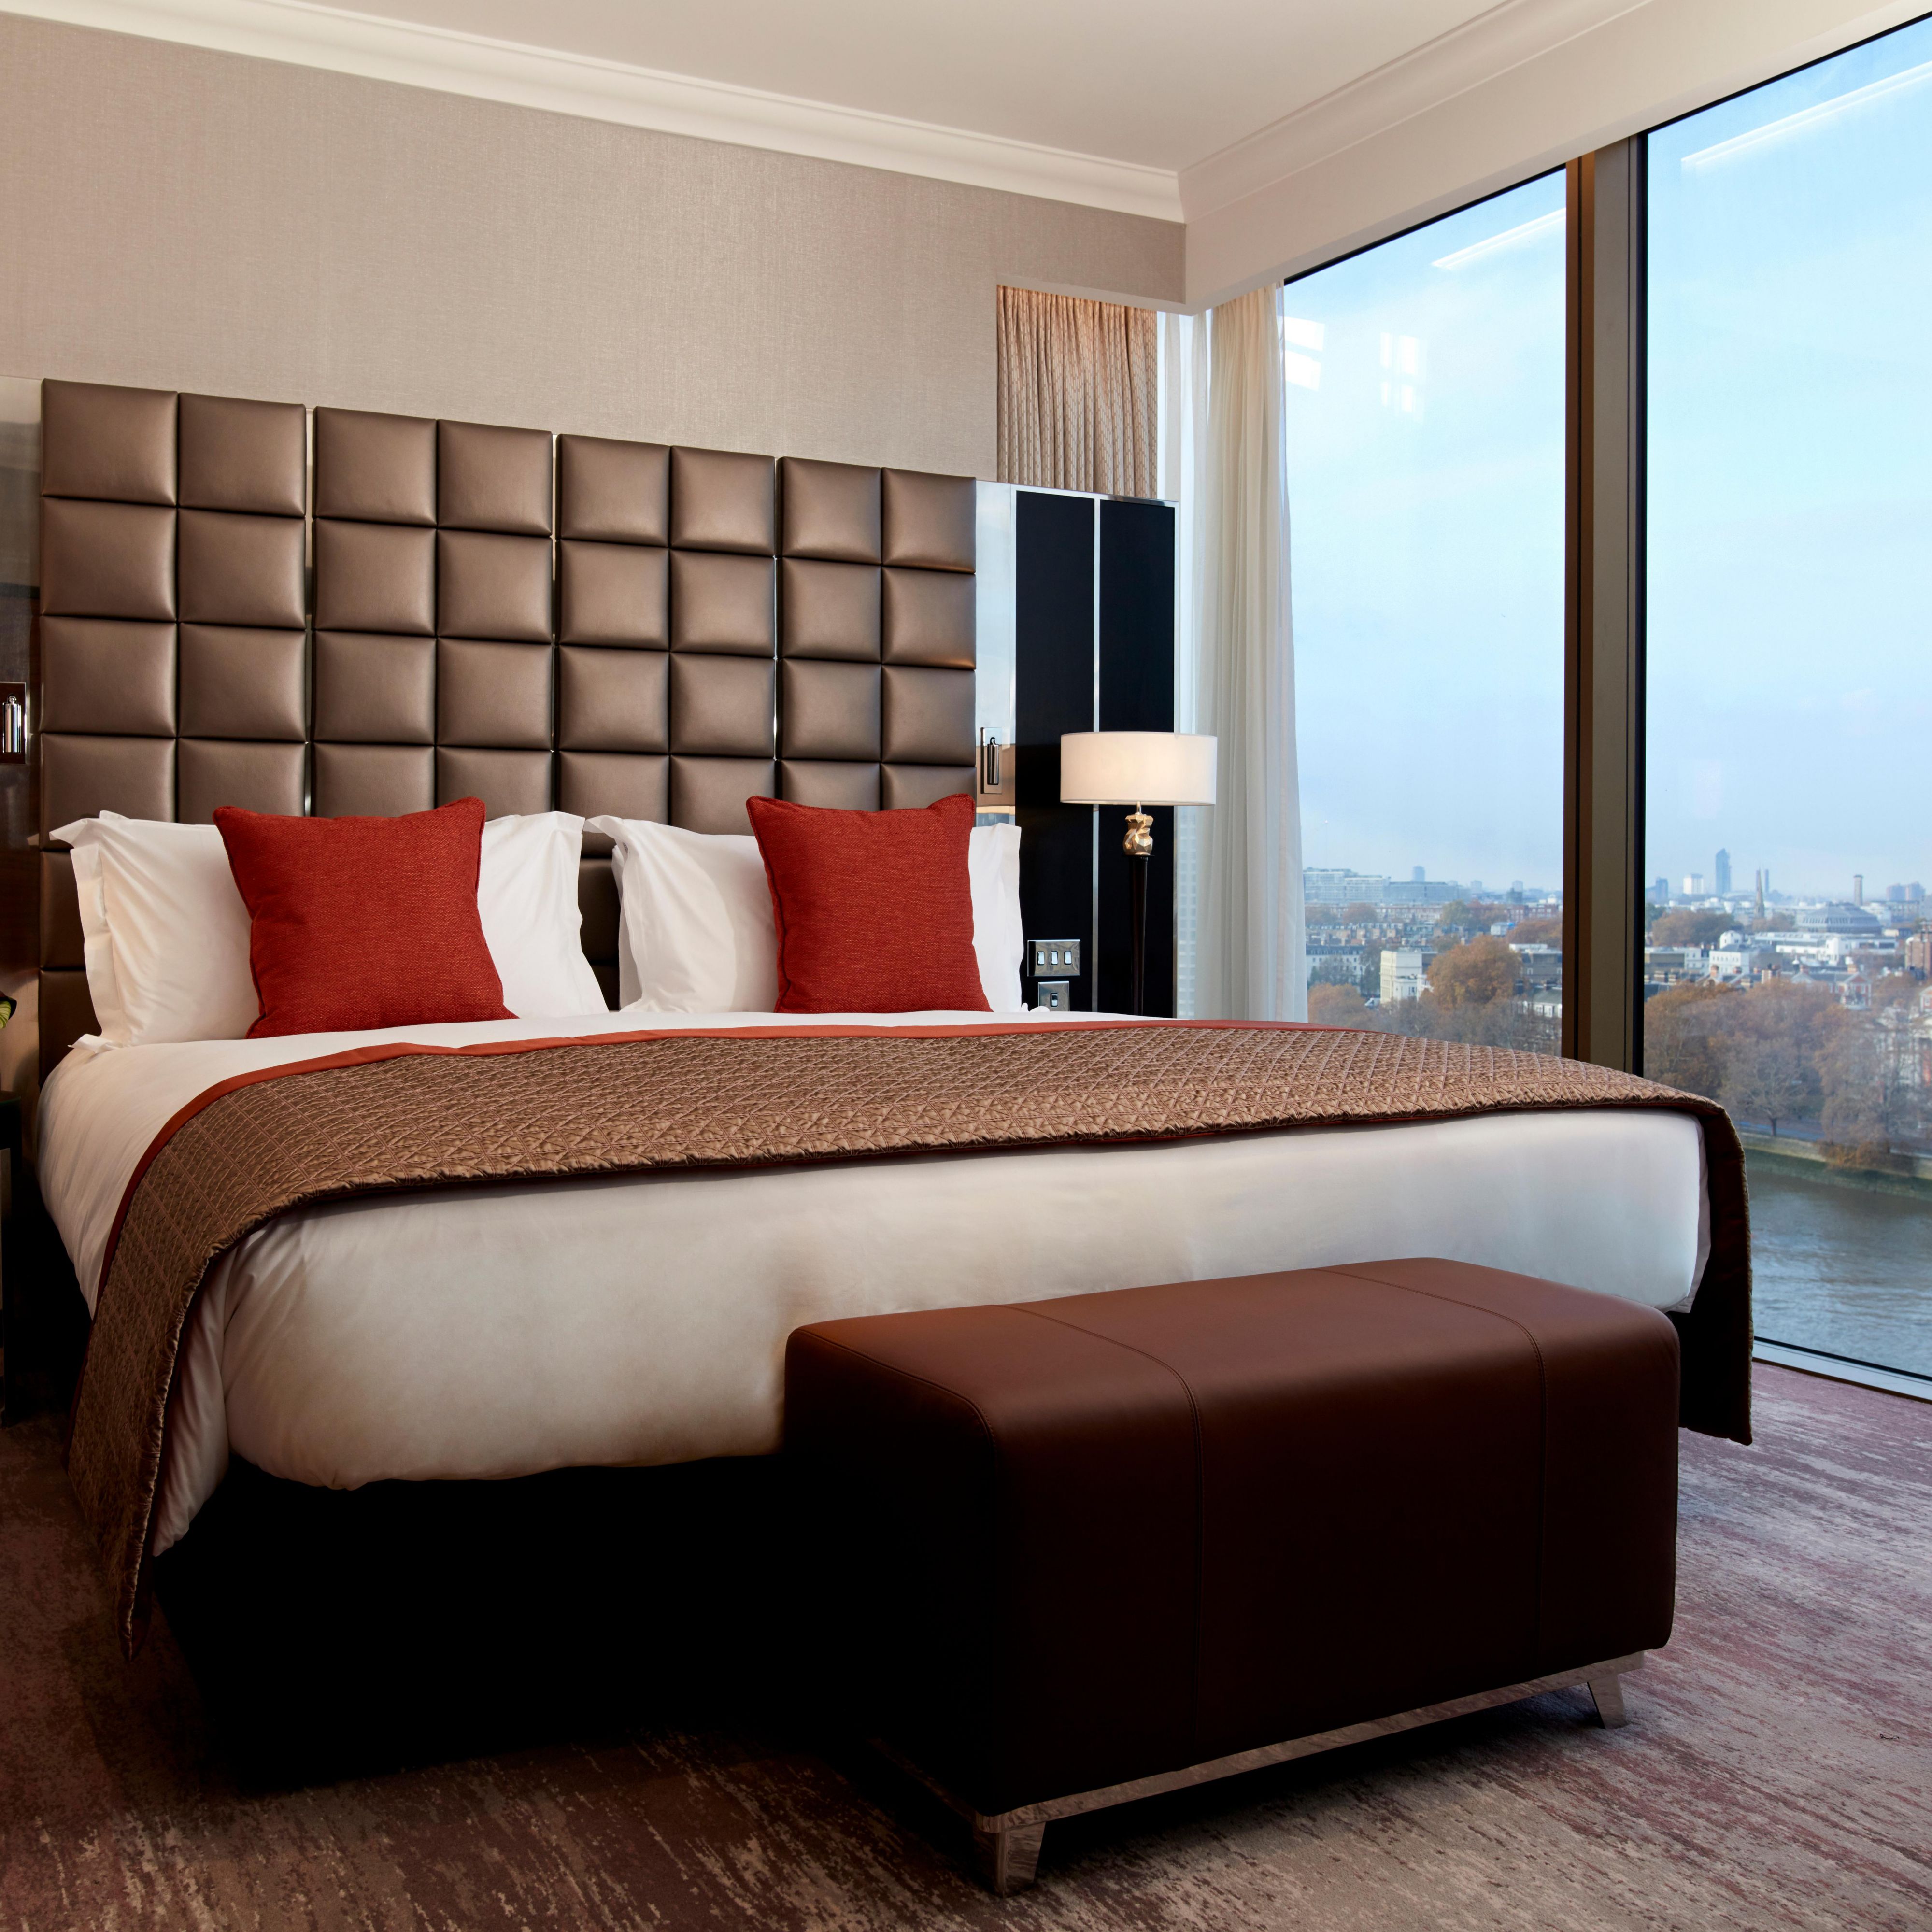 Enjoy the amazing views across the Thames from our one bed suite